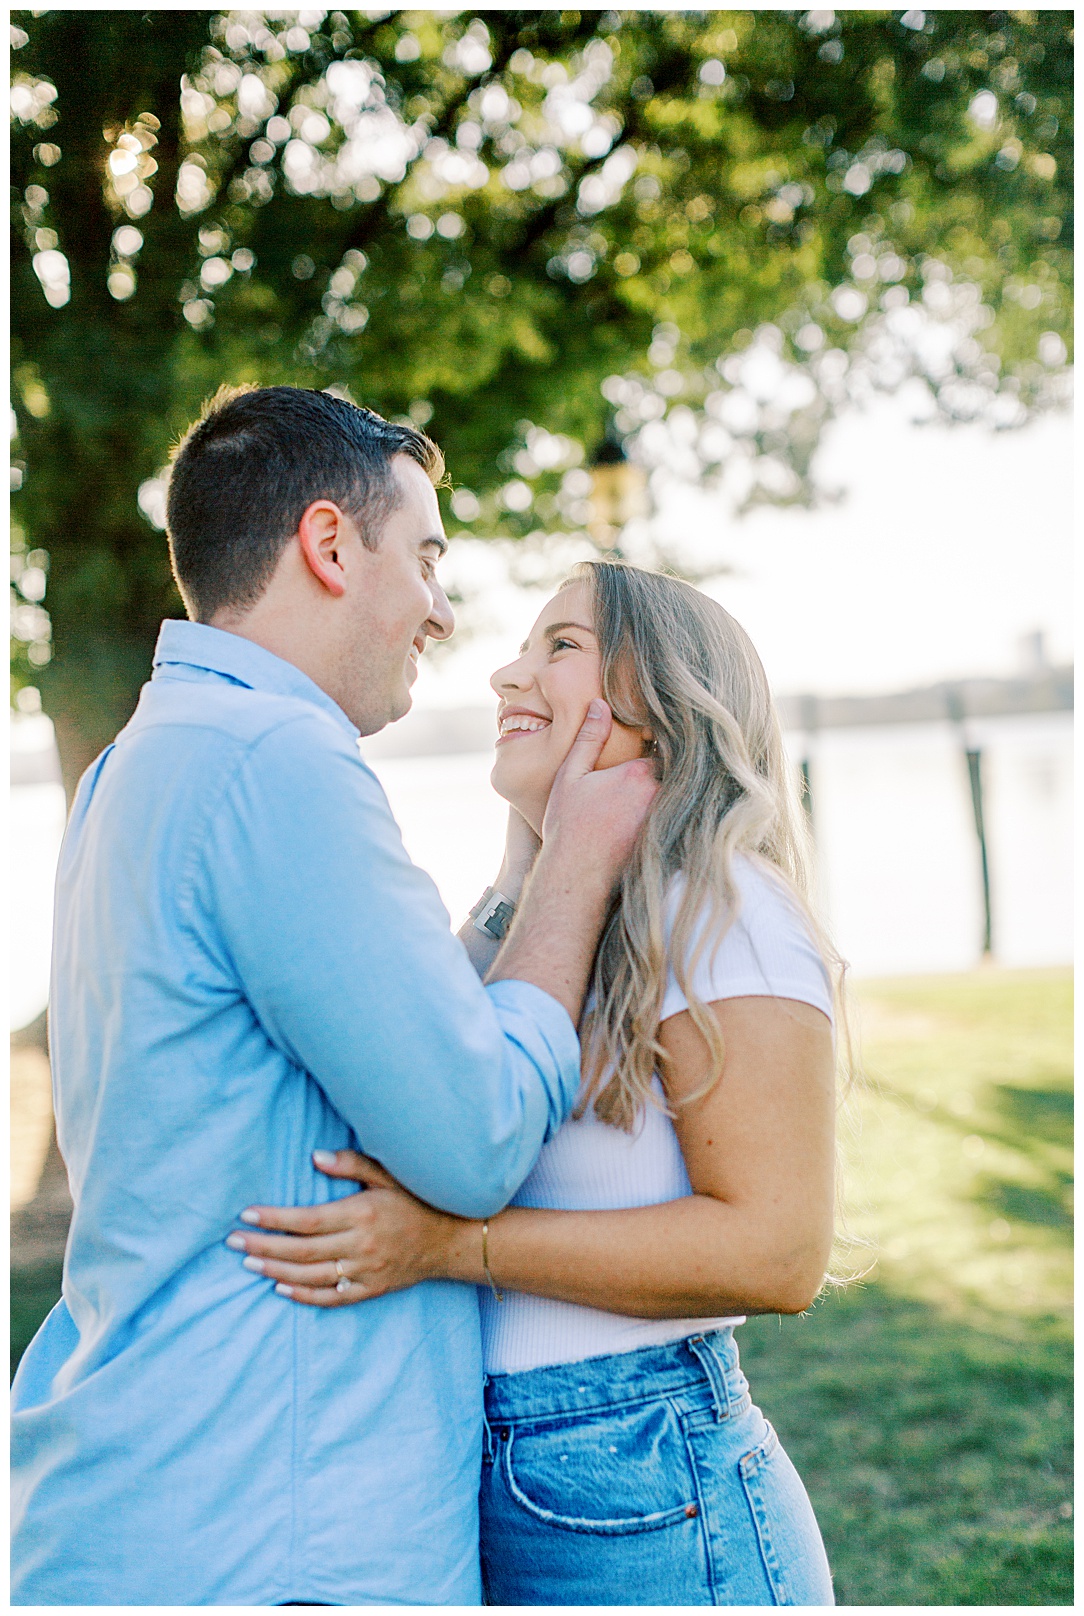 Old Town Alexandria Waterfront - Sunrise Engagement Session in Northern Virginia